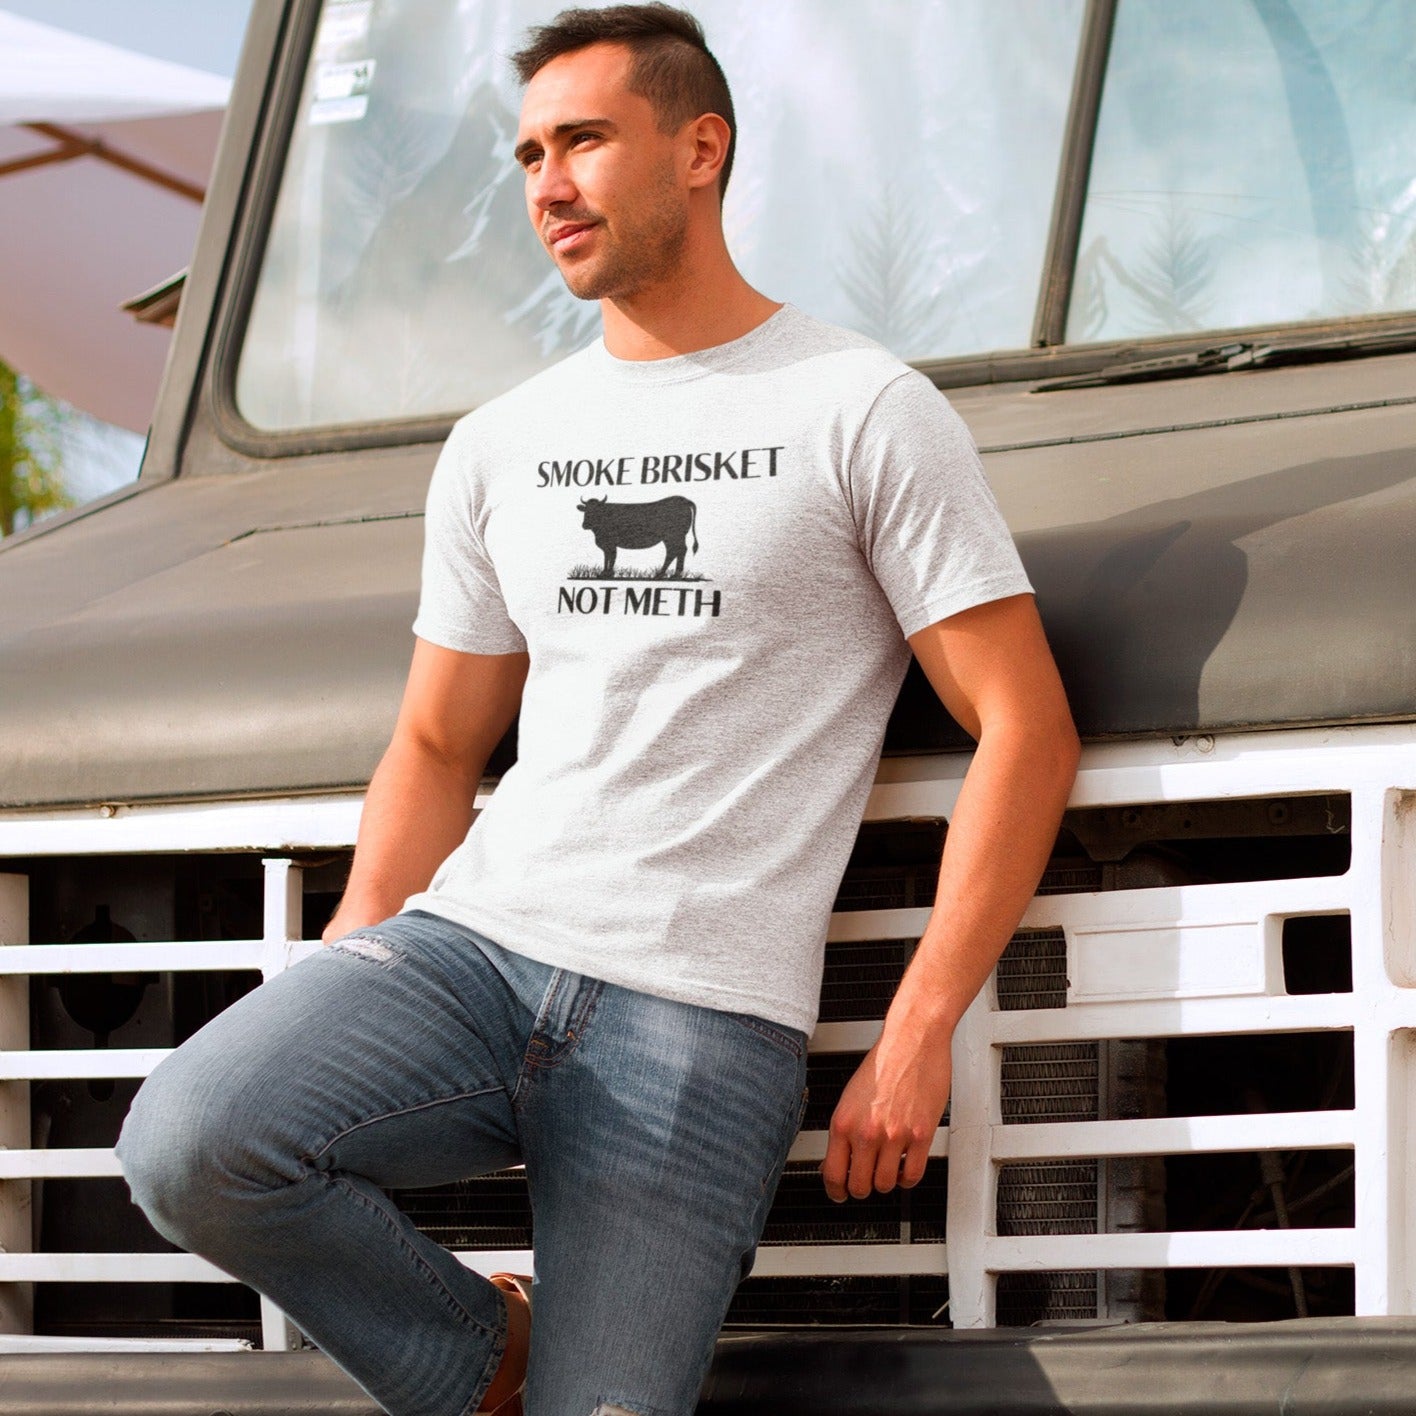 smoke-brisket-not-meth-white-t-shirt-funny-cow-mockup-of-a-young-man-leaning-on-an-old-truck